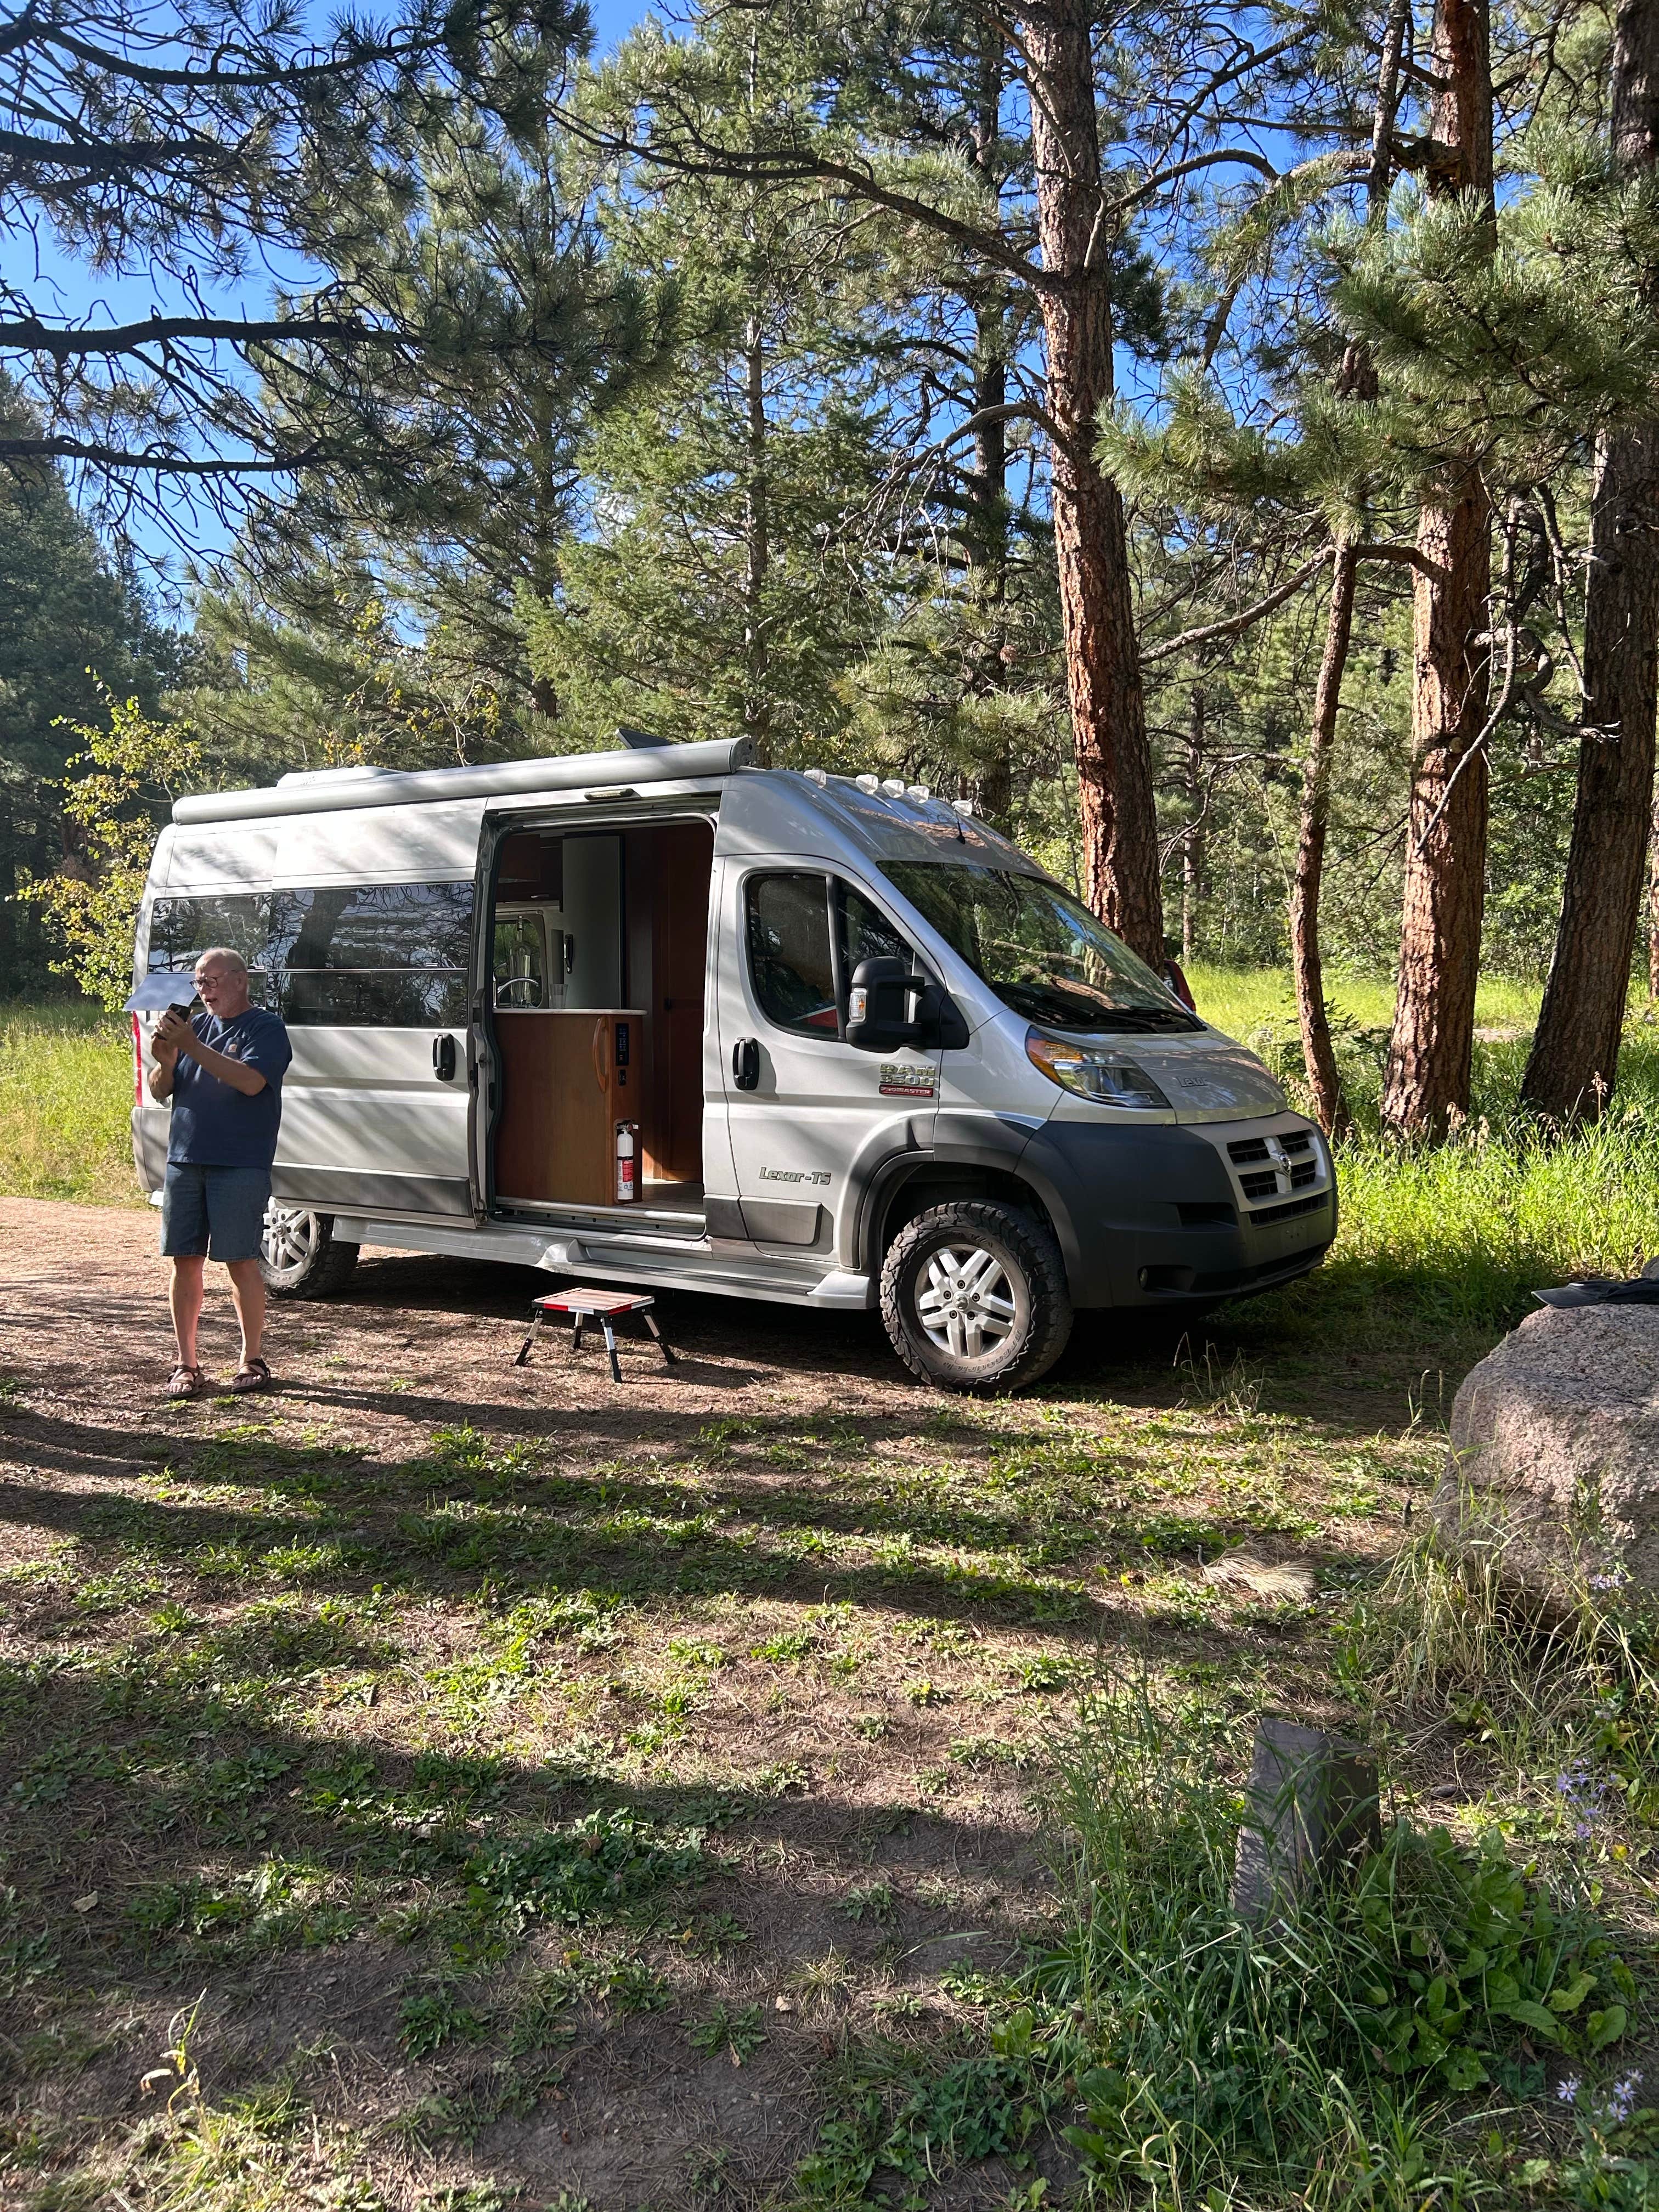 Flat Rocks Campground - Camping in Colorado's Front Range 